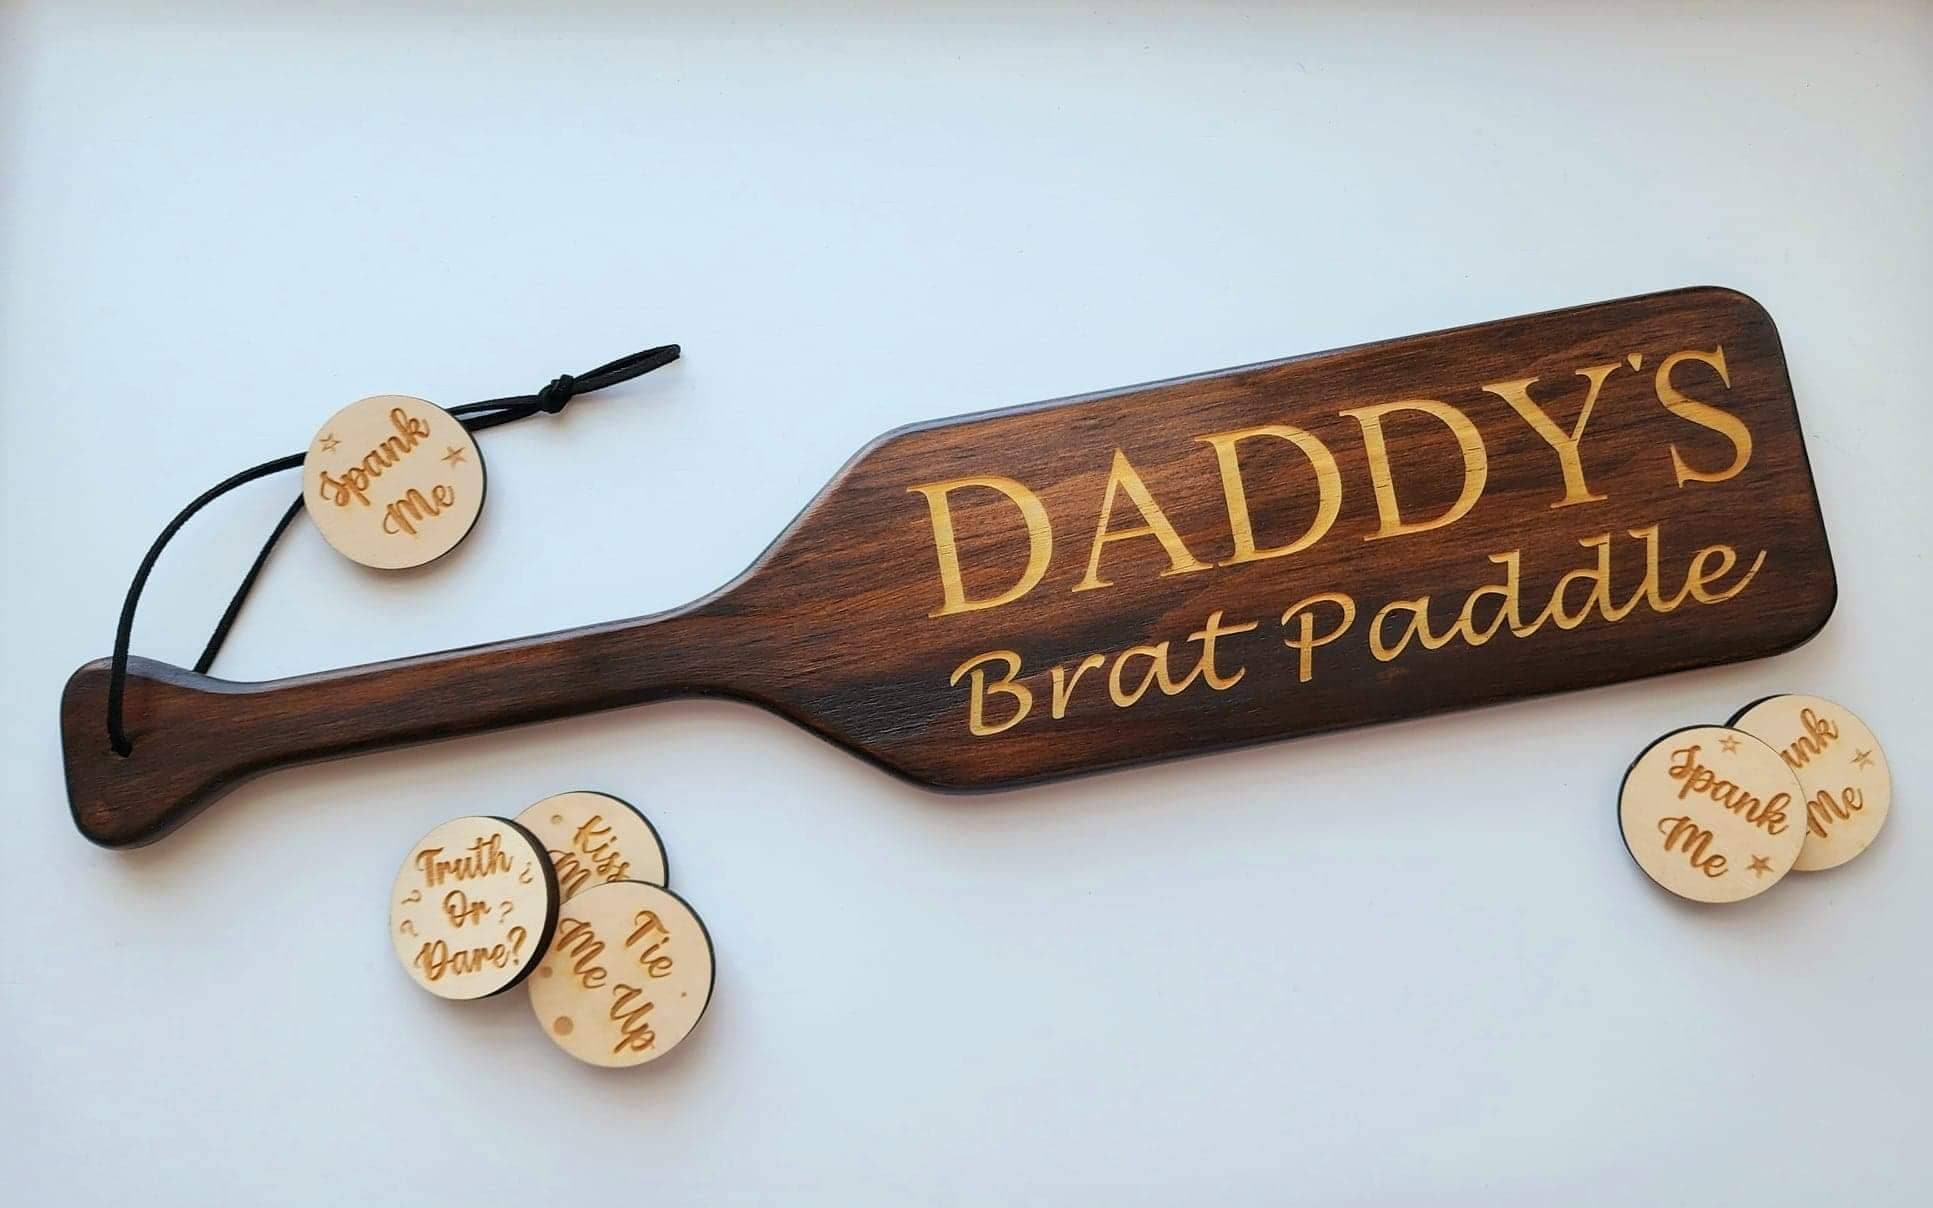 Daddys Brat Paddle BDSM Spanking Paddle Personalized photo picture